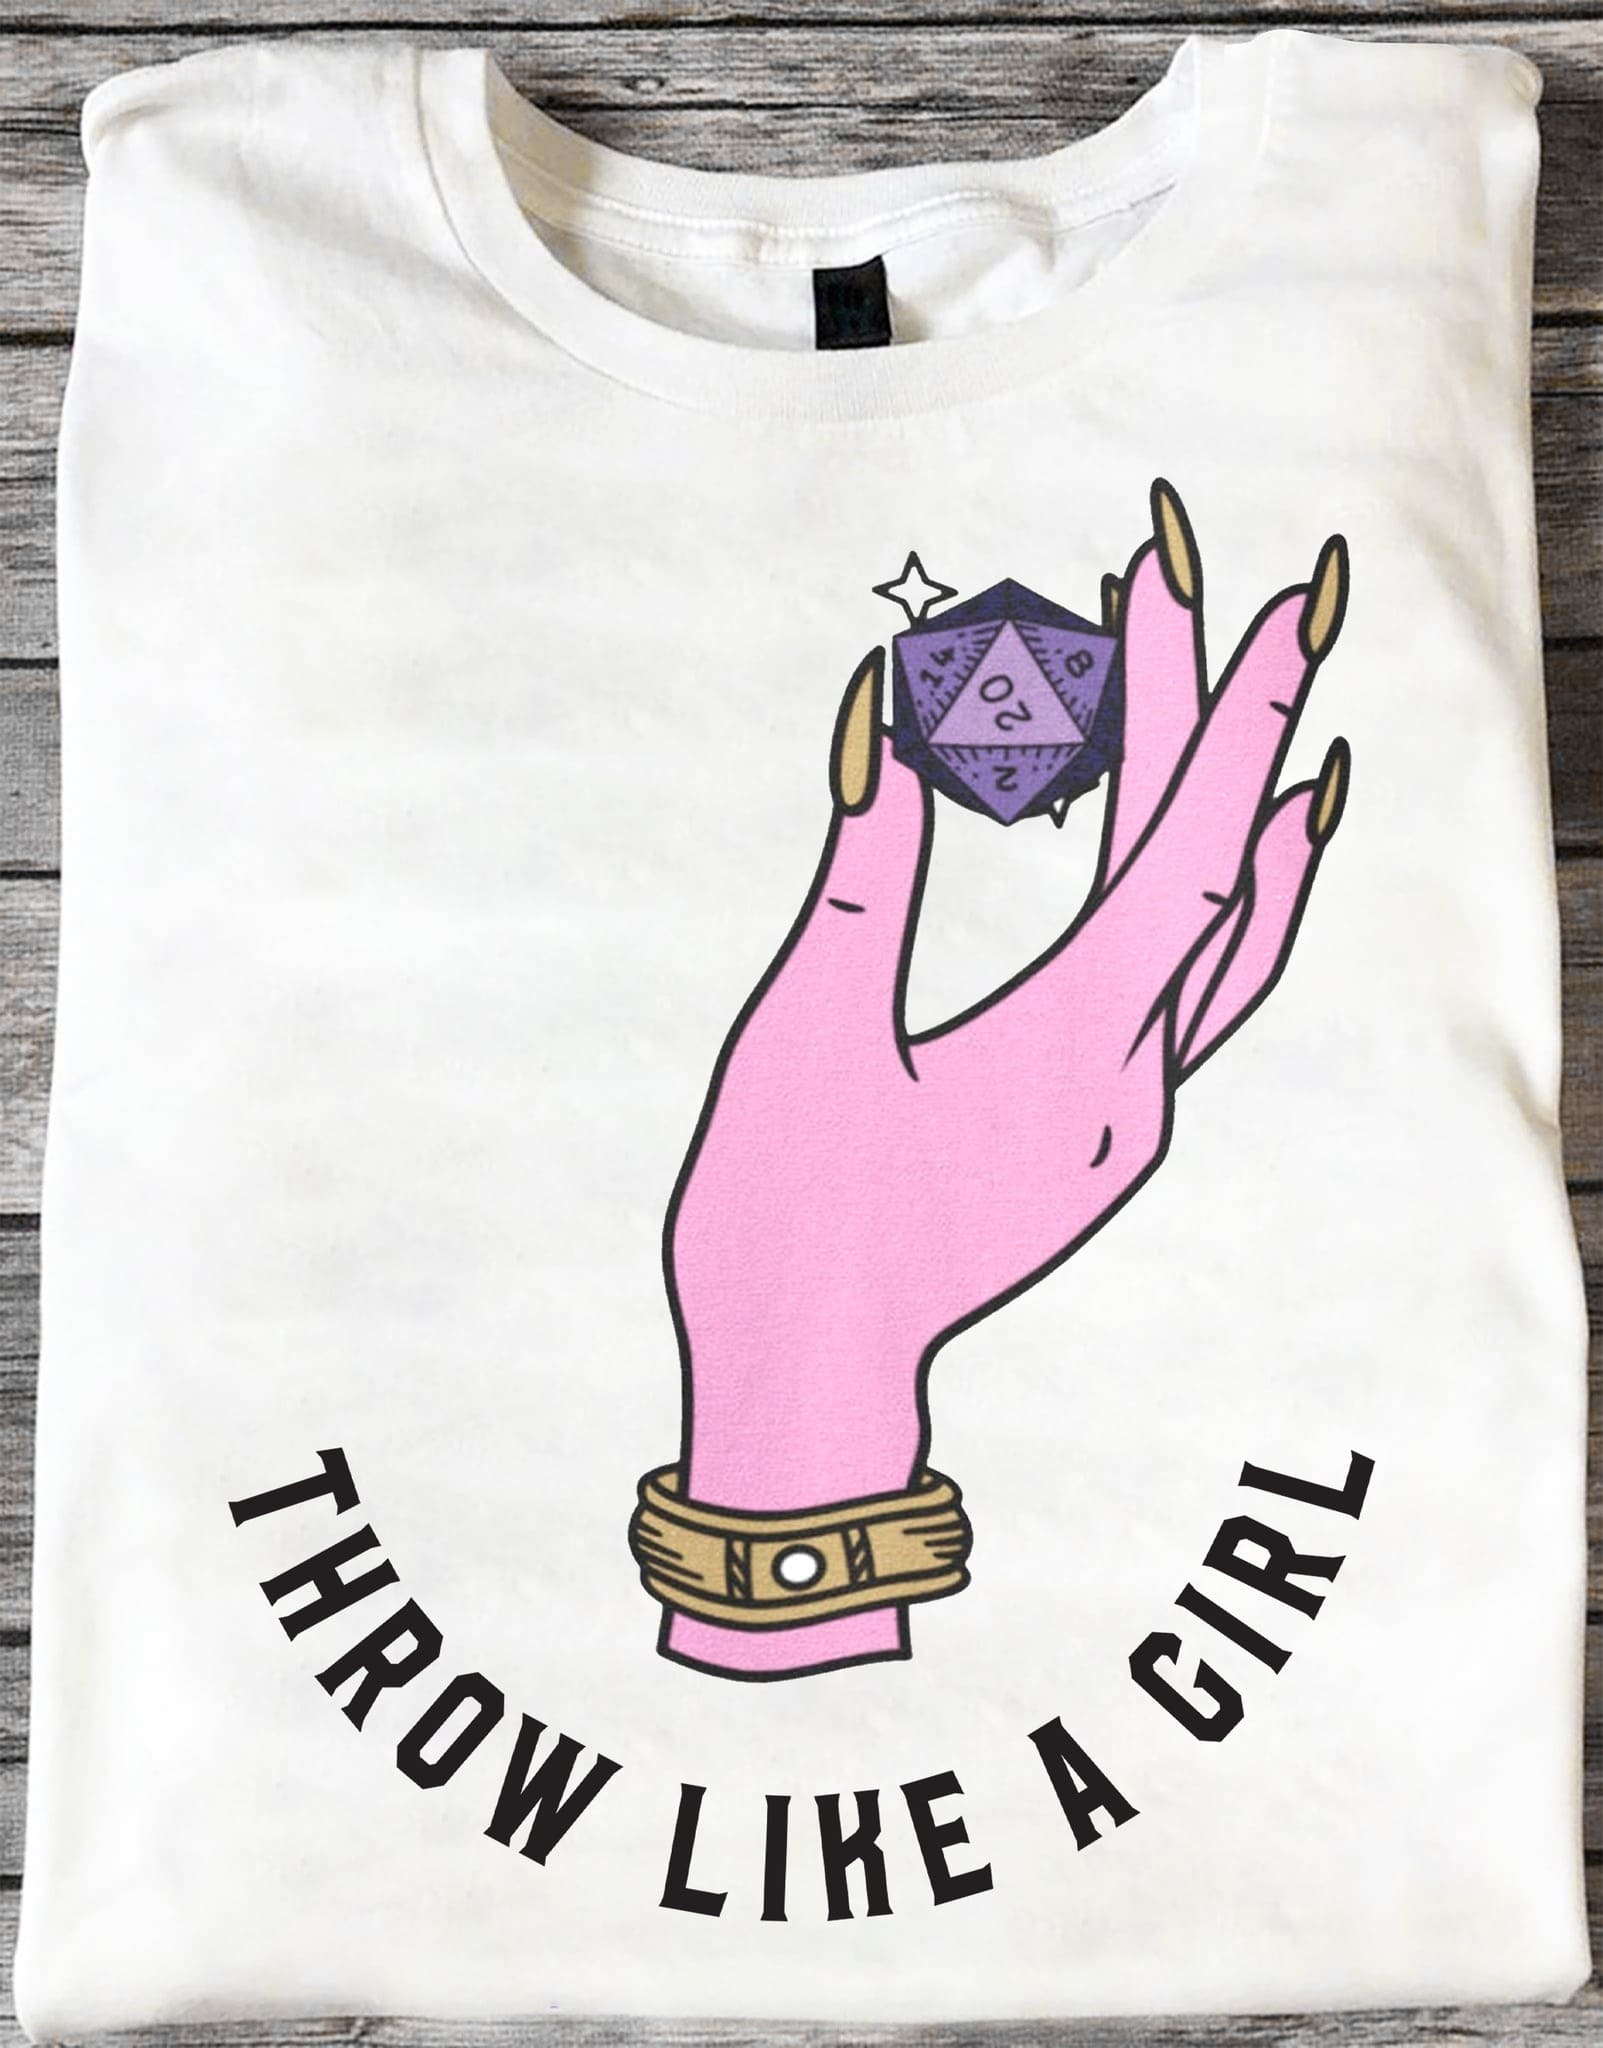 Throw like a girl - Girl play DnD, Dungeons and Dragons